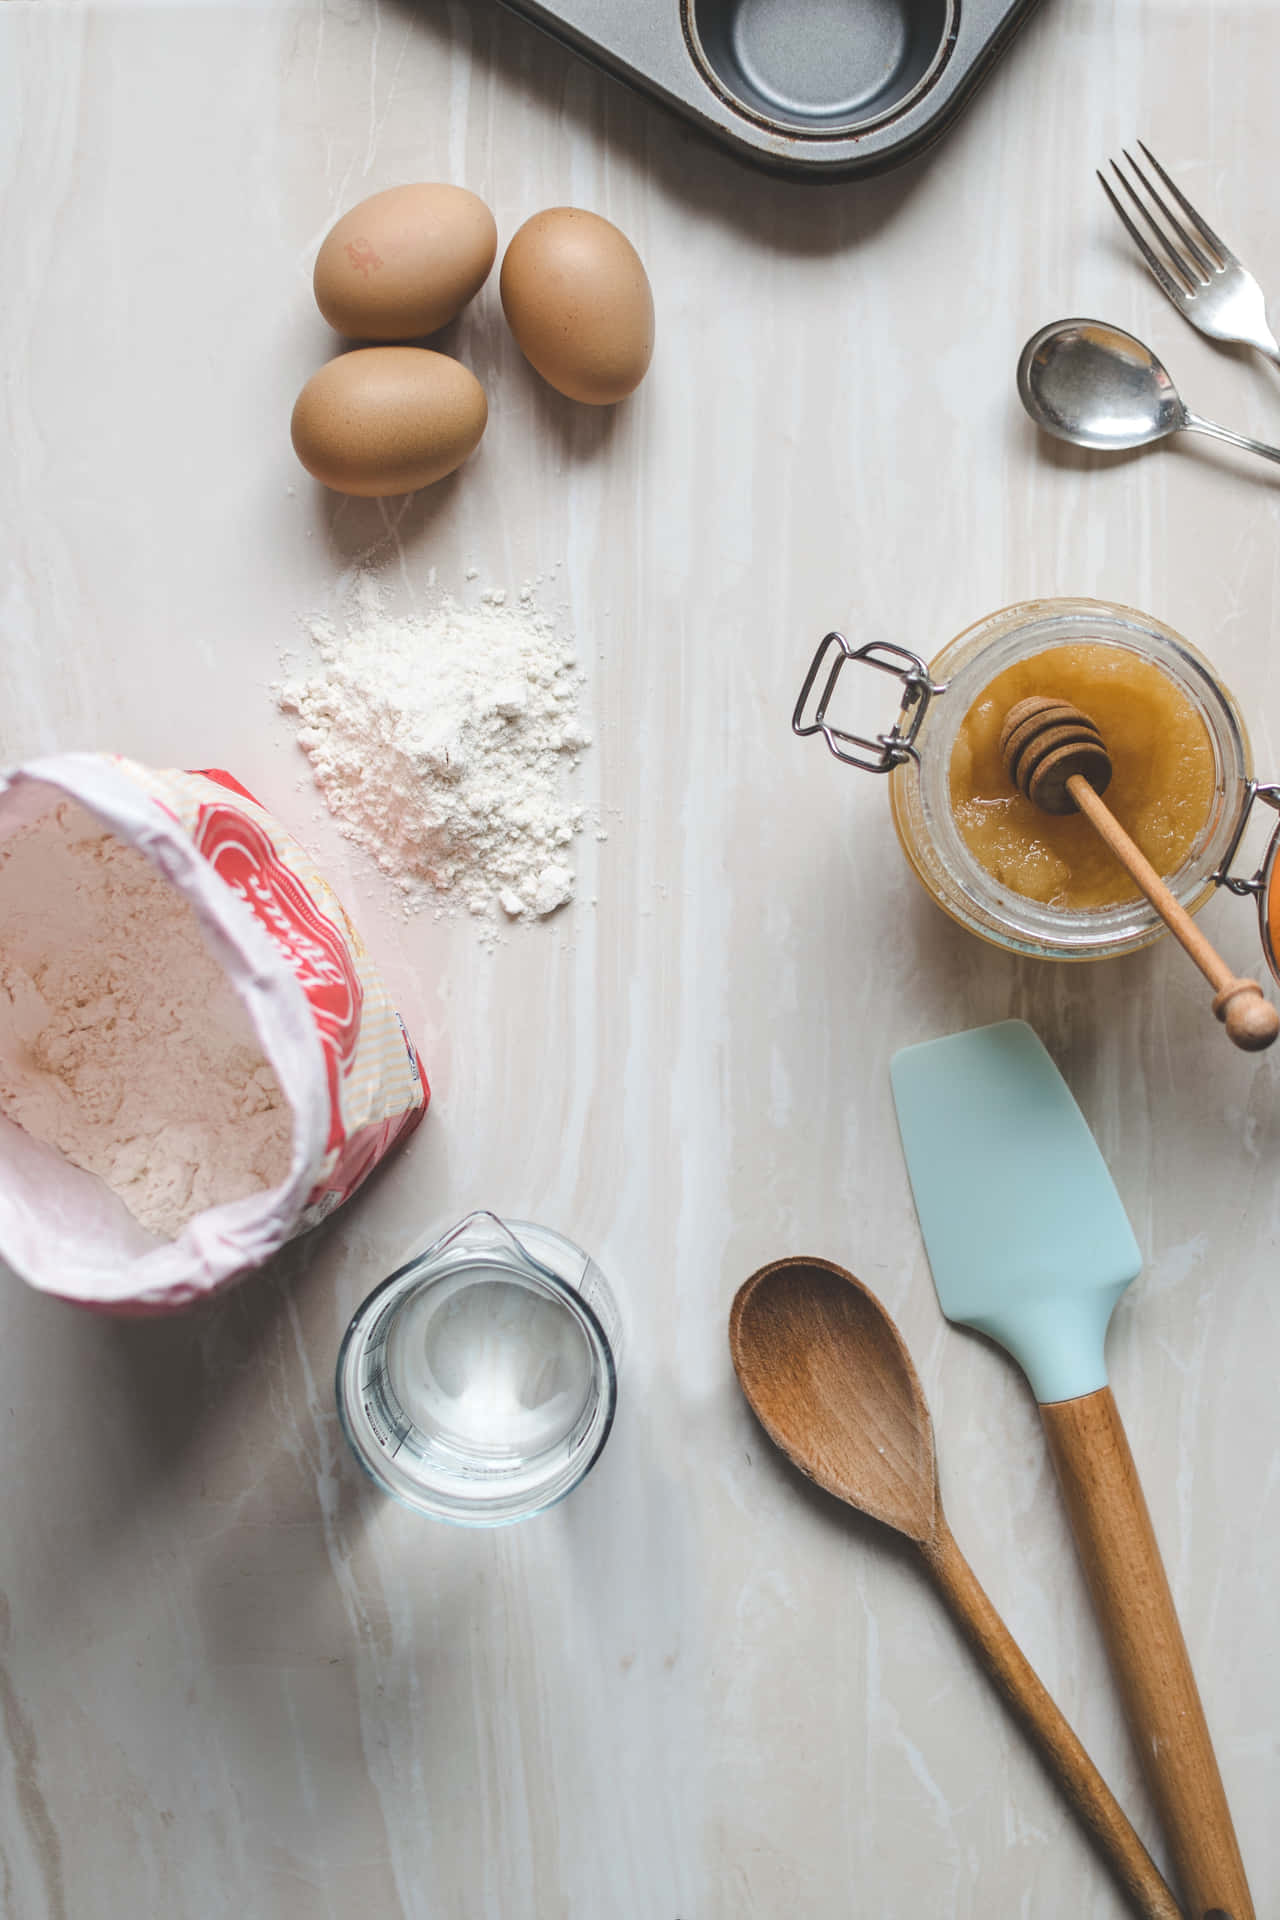 Artistry Of Baking: A Look Into A Bakehouse Kitchen